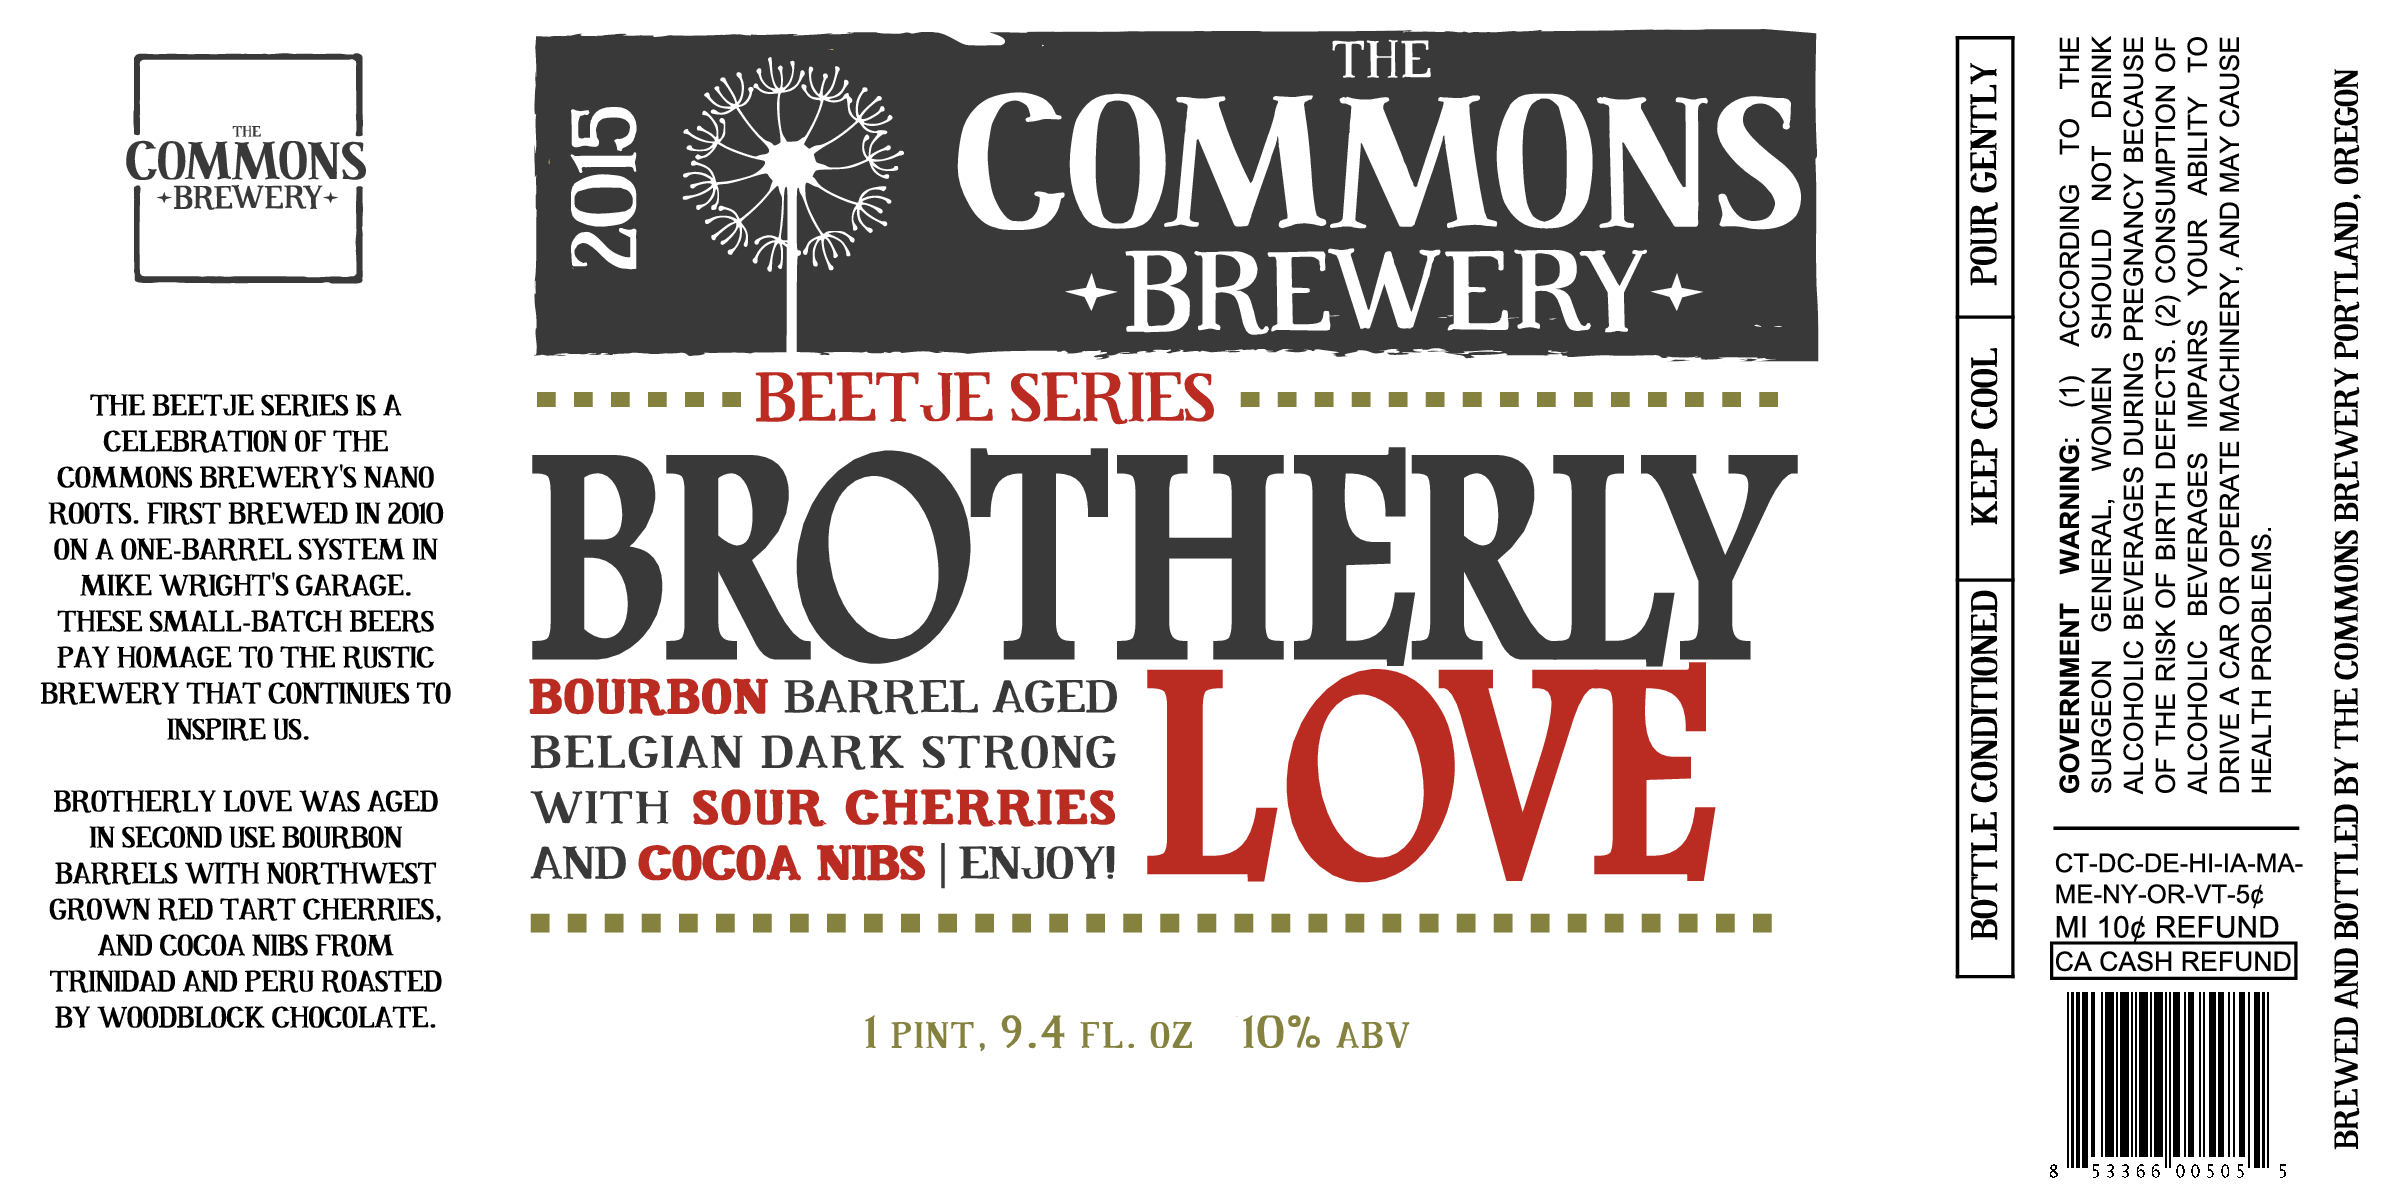 The Commons Brewery Brotherly Love 2015